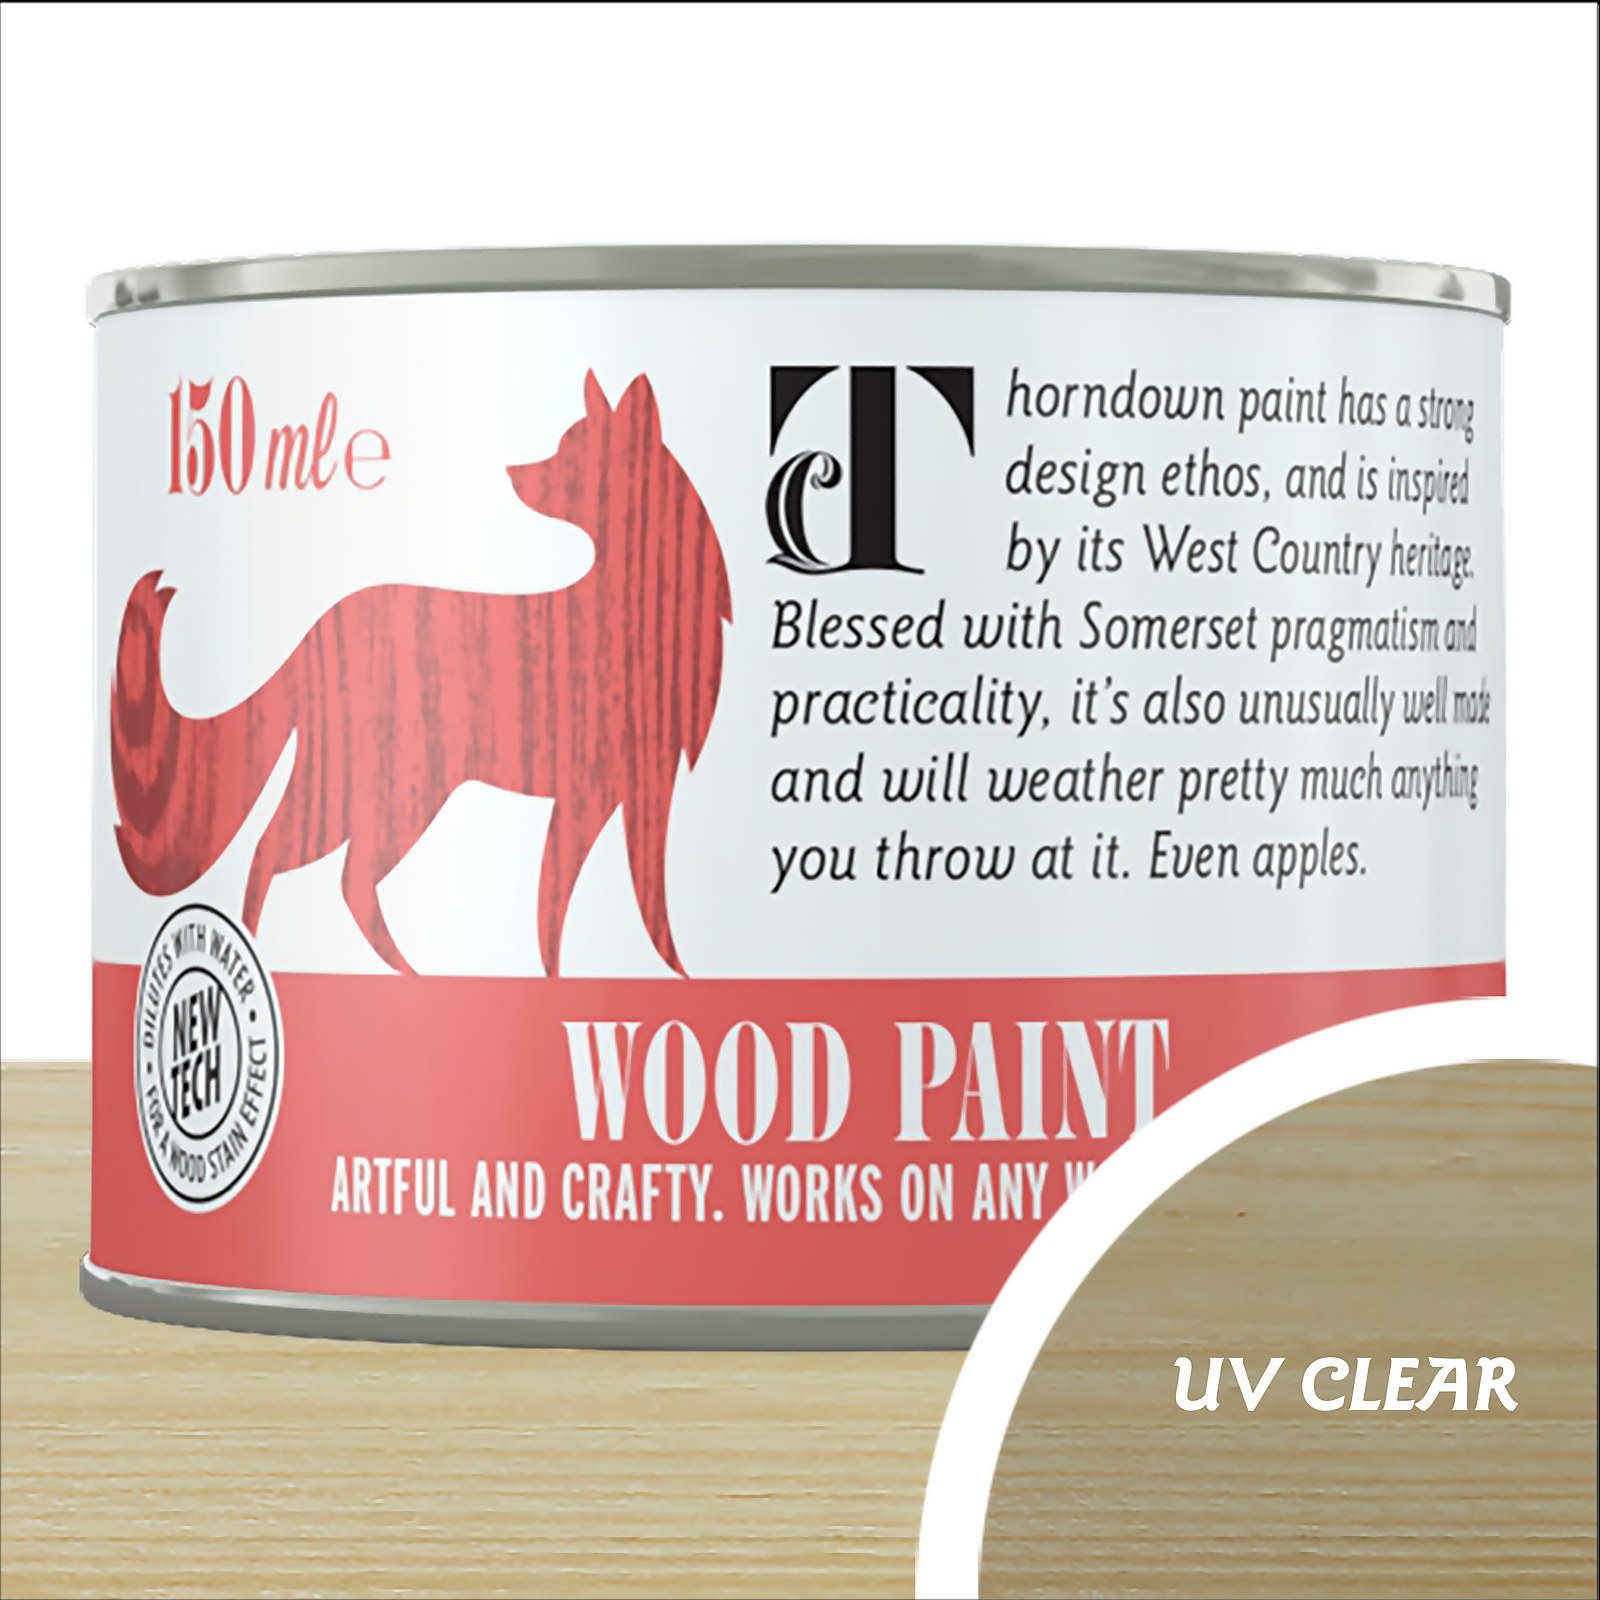 Photo of Thorndown Uv Clear Wood Paint 150ml